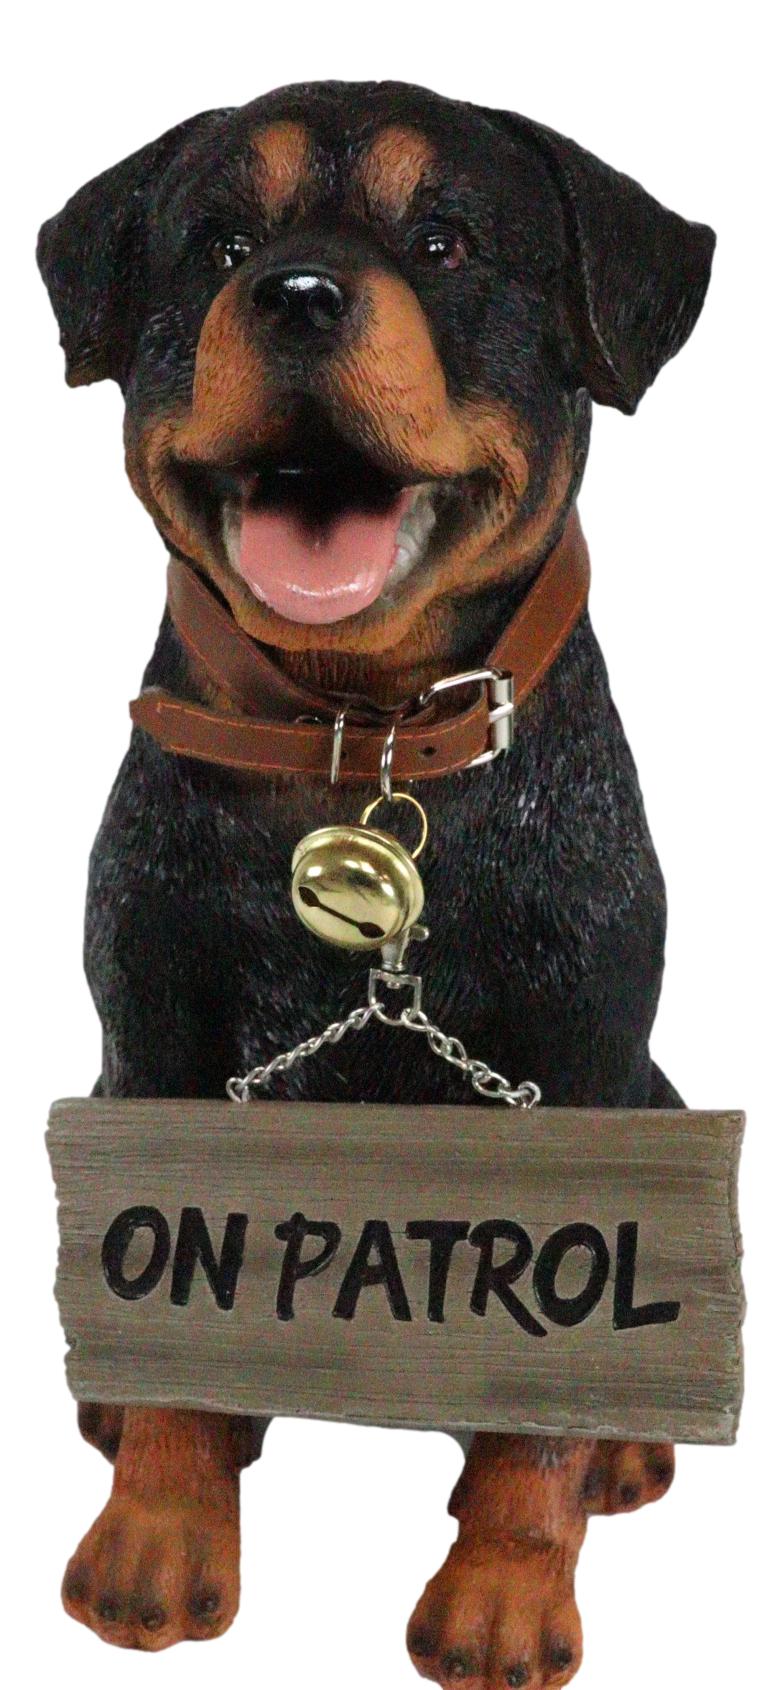 Guest Welcome Realistic Rottweiler Dog With Jingle Collar Sign Decor Statue 13"H